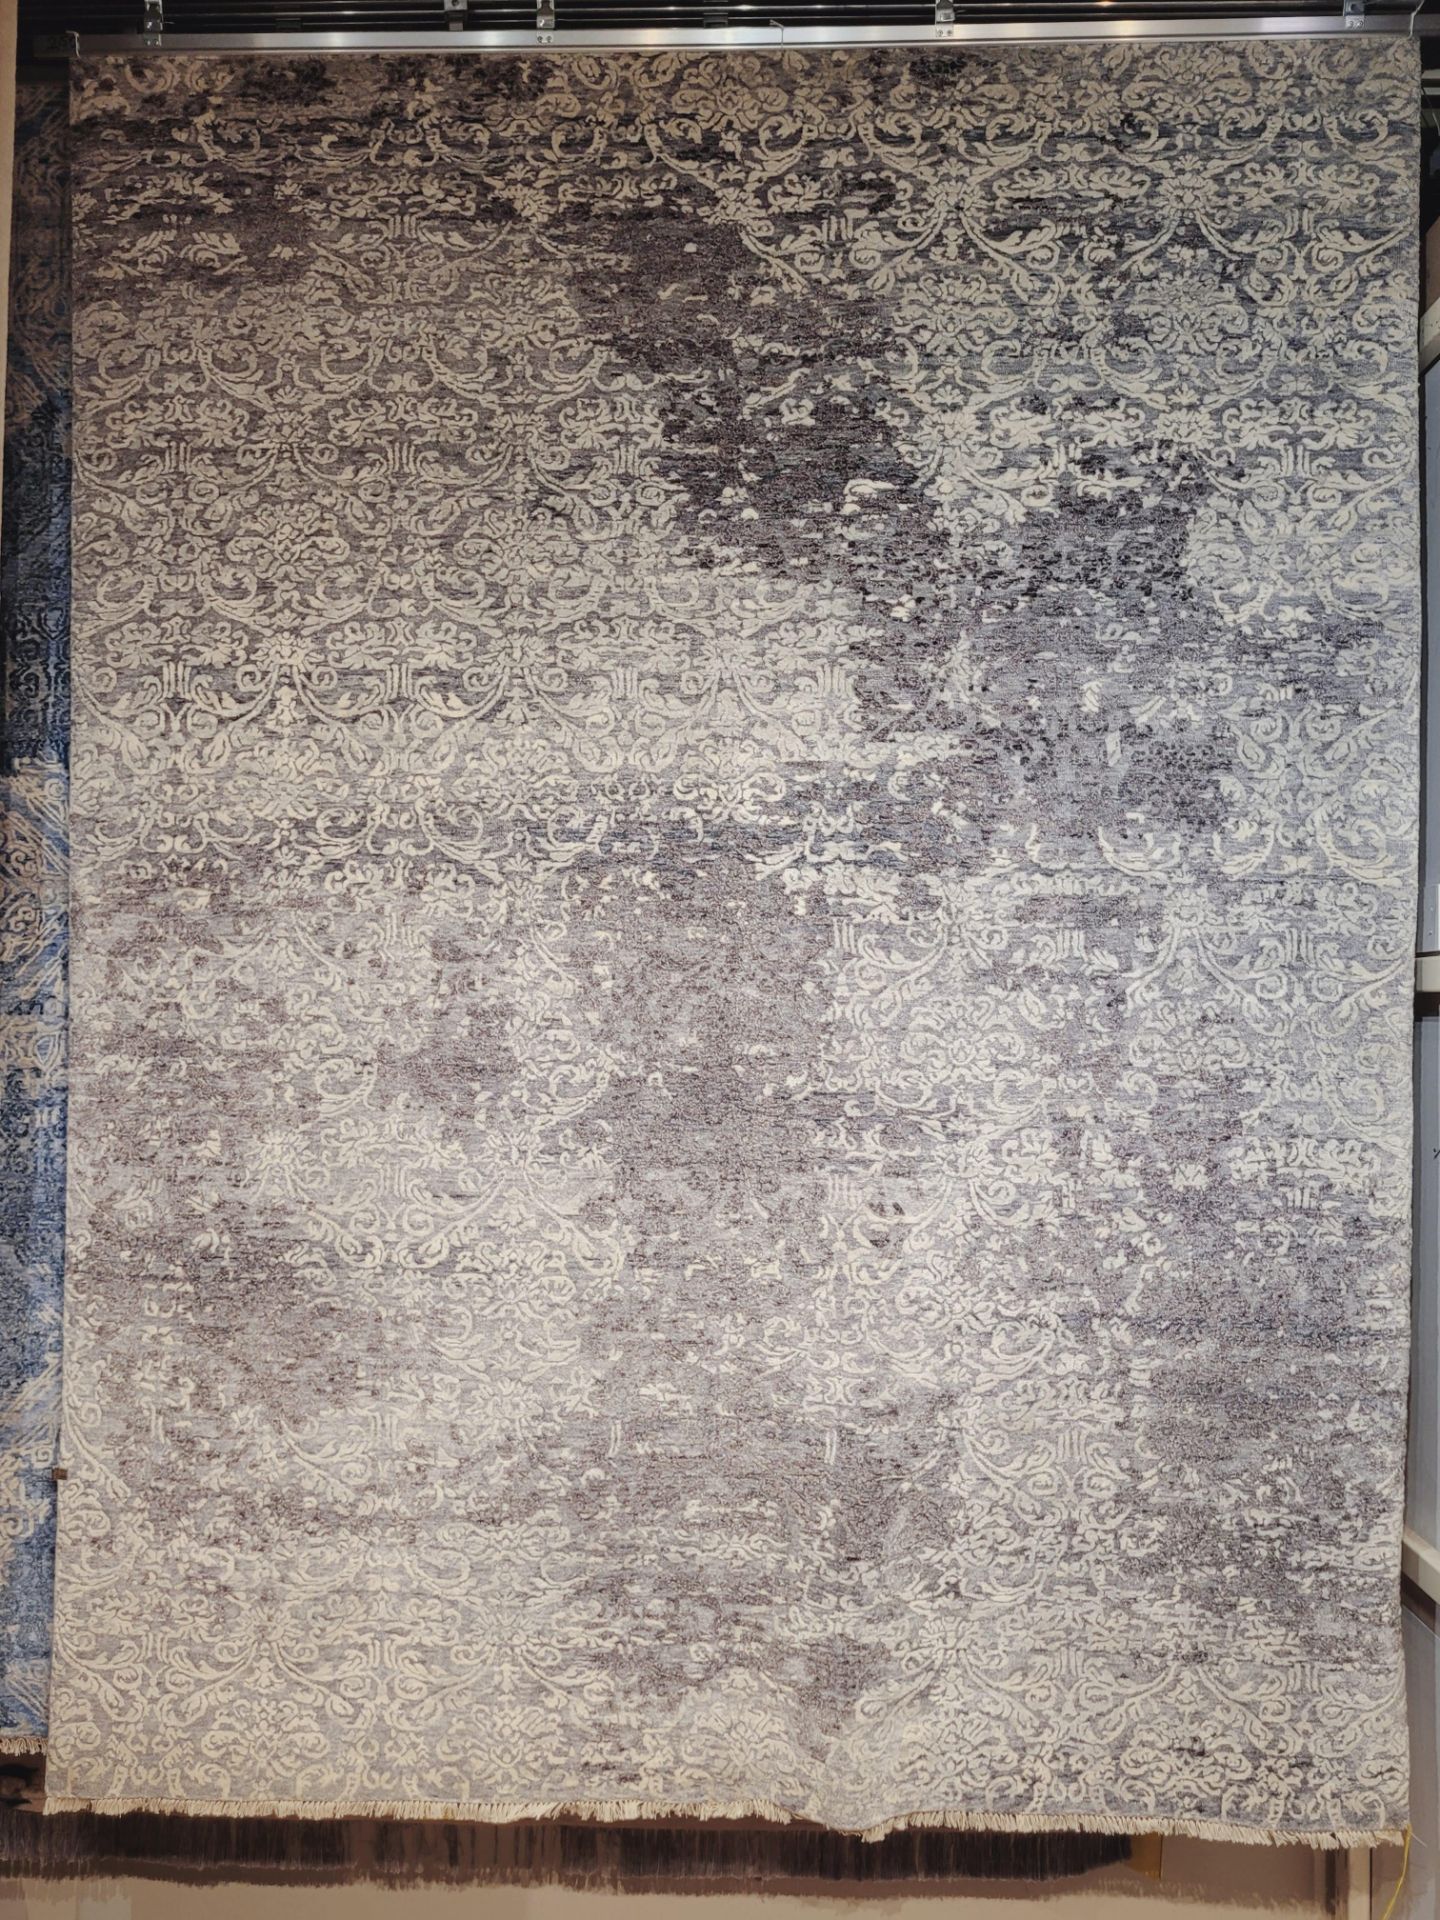 APPROX 8' x 10' - GRAY/SILVER - ART. SILK HAND KNOTTED IN INDIA - MSRP $5,997.00 (LOCATED IN GALLERY - Image 2 of 5